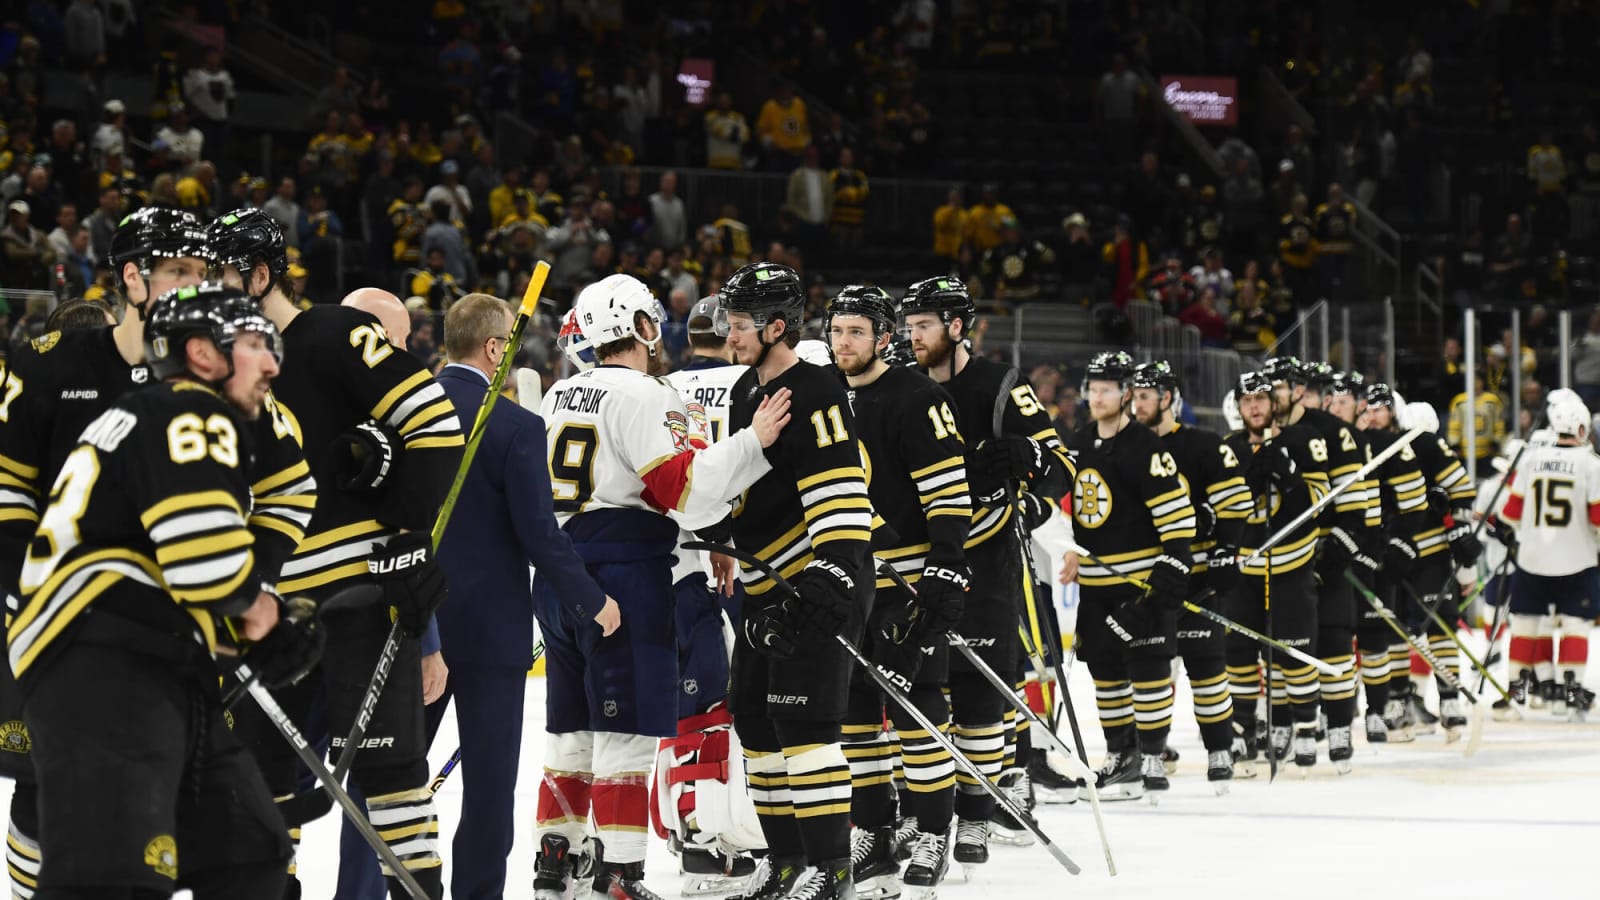 Bruins Postgame: Bruins DONEdell, Lose 2-1 To Panthers